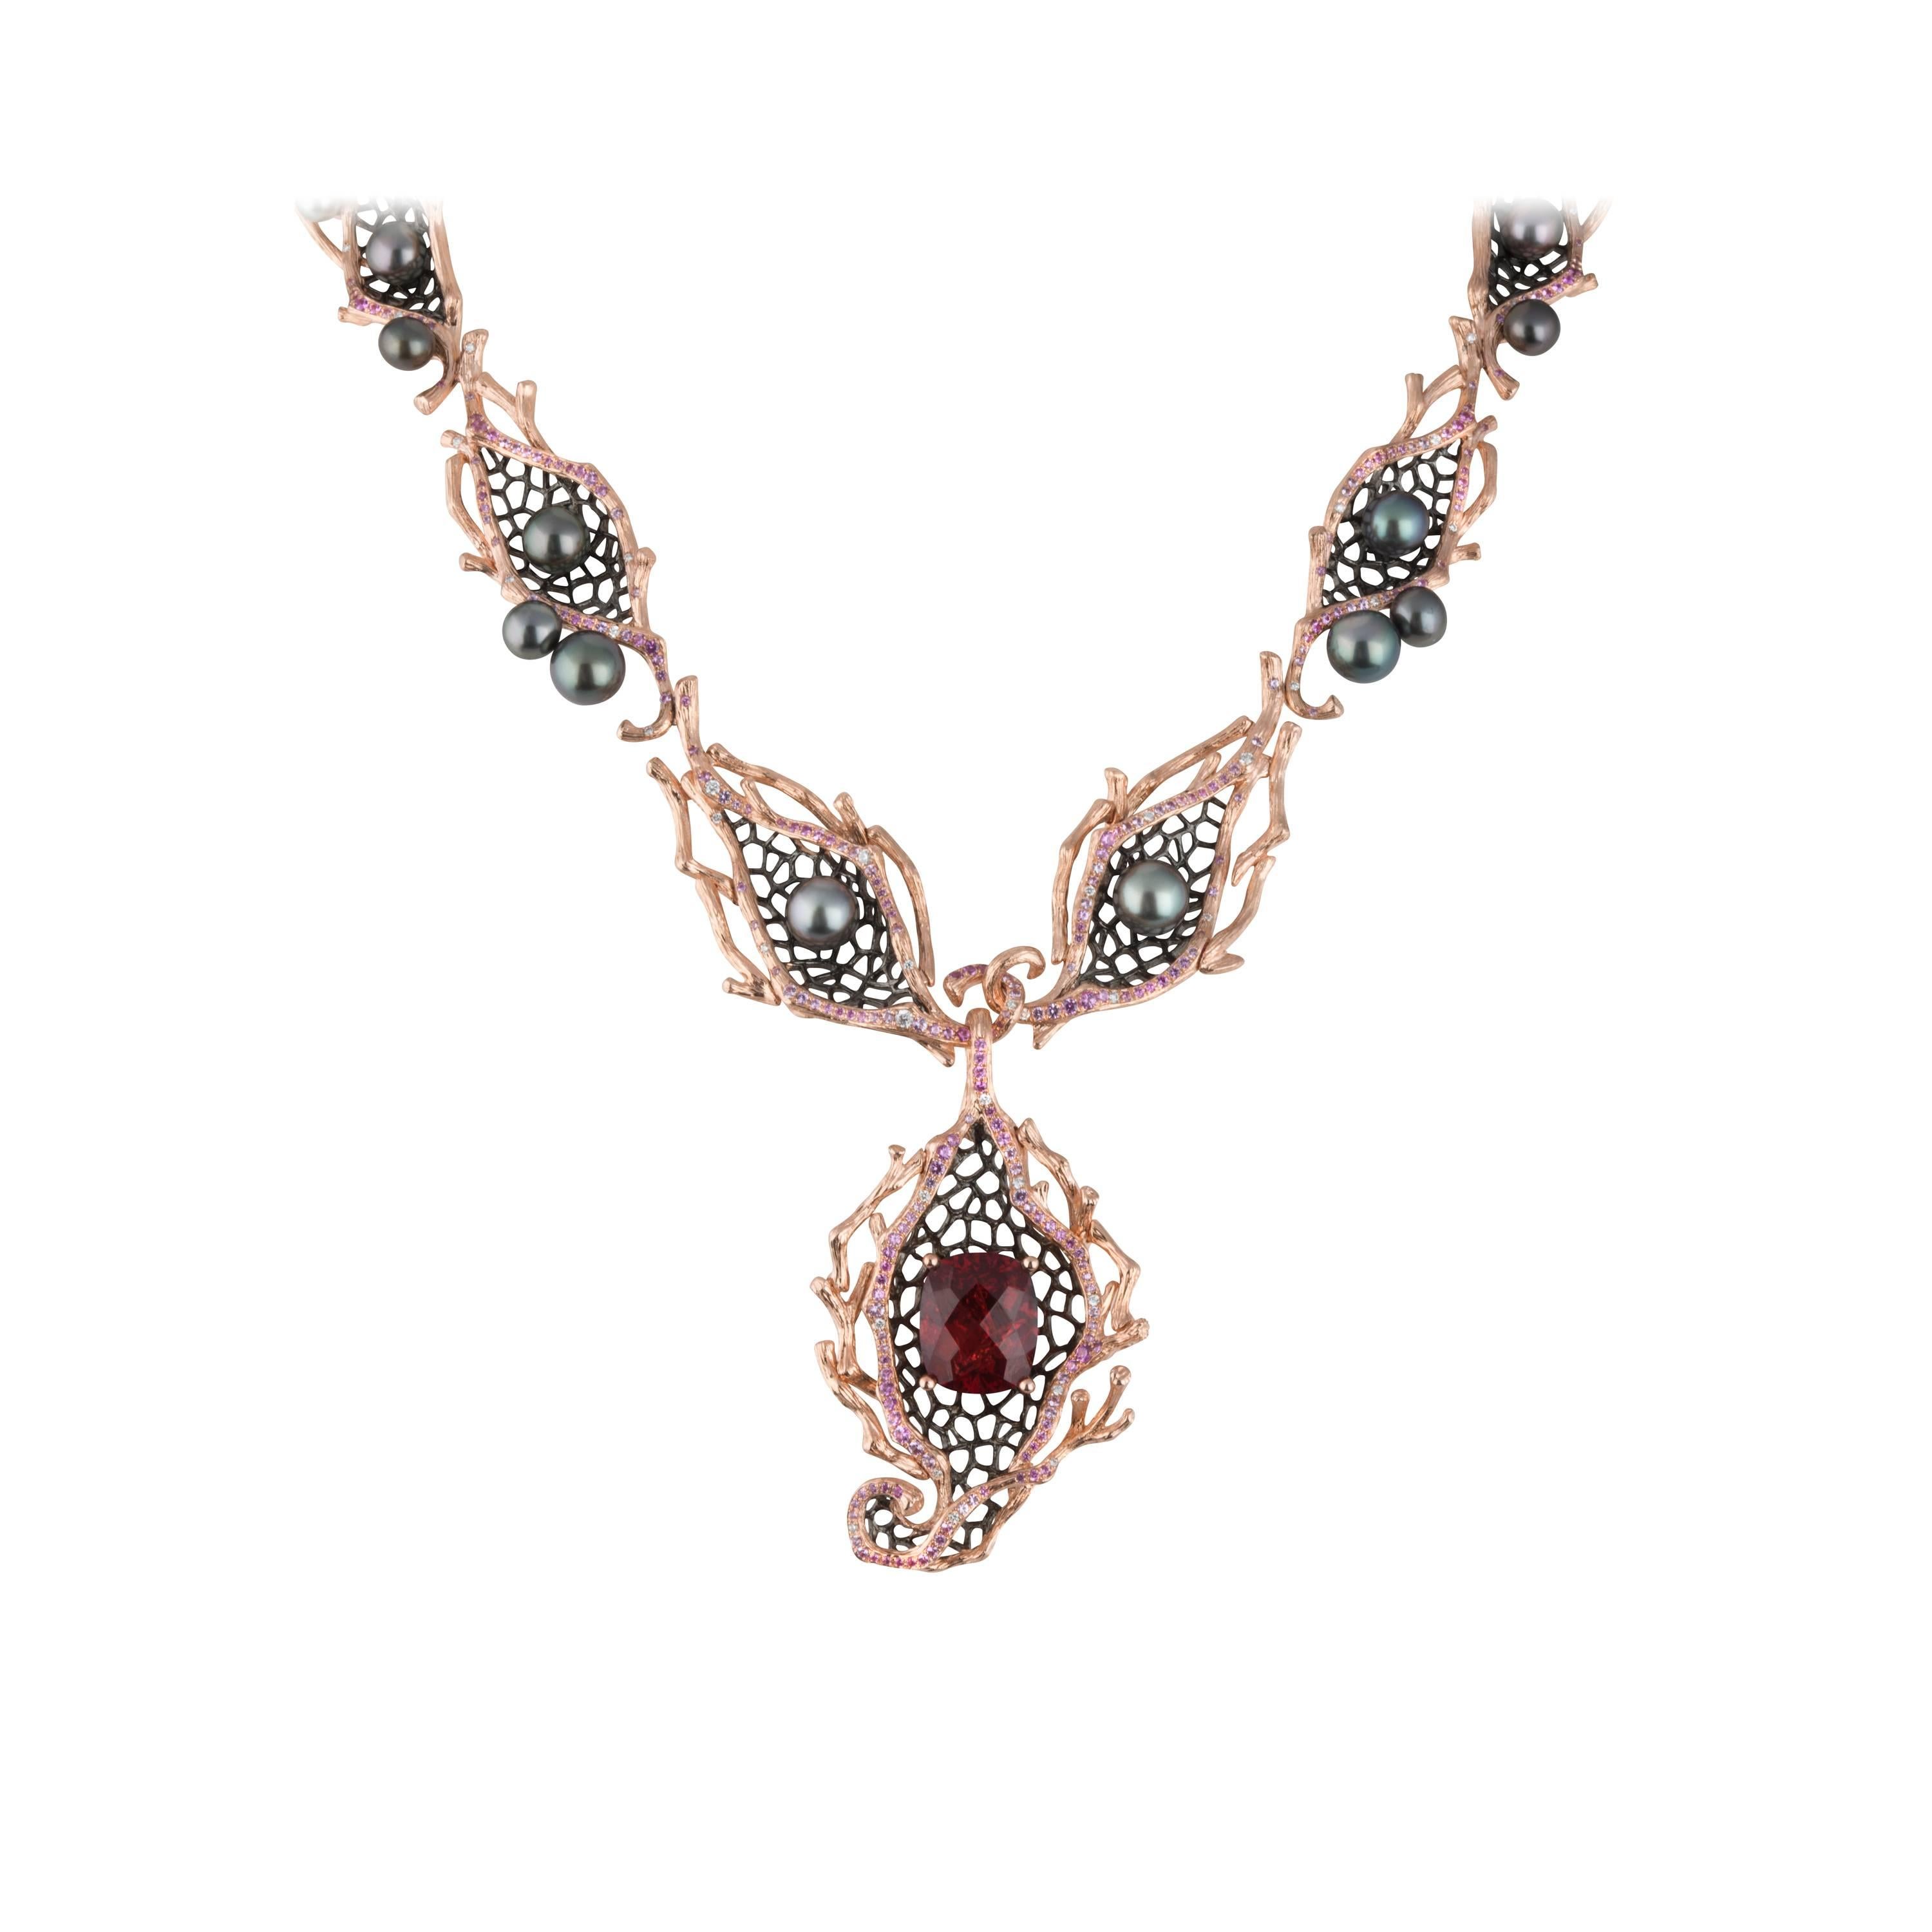 Inspired by journeys of metamorphosis, this 18K rose gold necklace from the Golden Berry collection unfurls to reveal more than meets the eye. Featuring a mesmerising 5.89ct red garnet, keshi pearls,1.47ct pink sapphires and 0.21ct diamonds, this